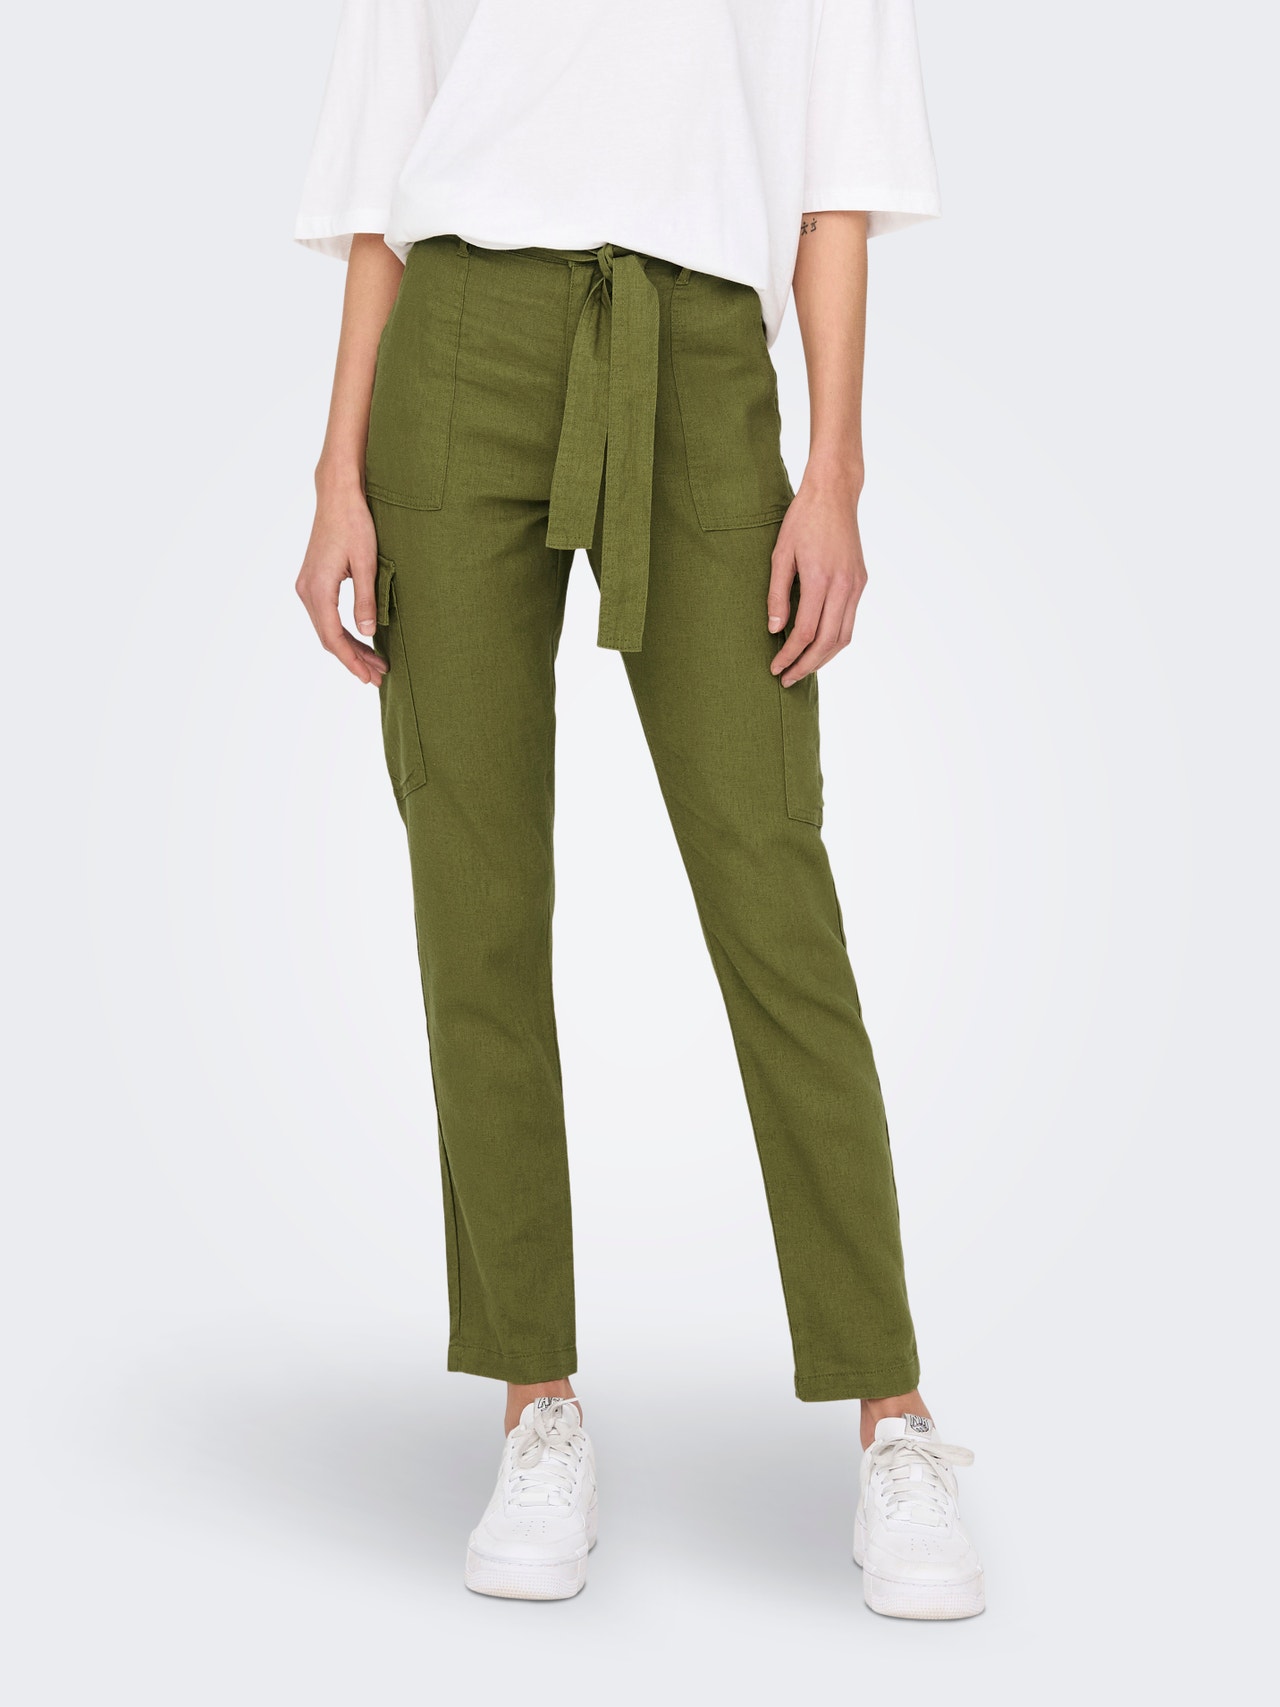 ONLY Cargo Schnitt Hohe Taille Hose -Olive Branch - 15278728